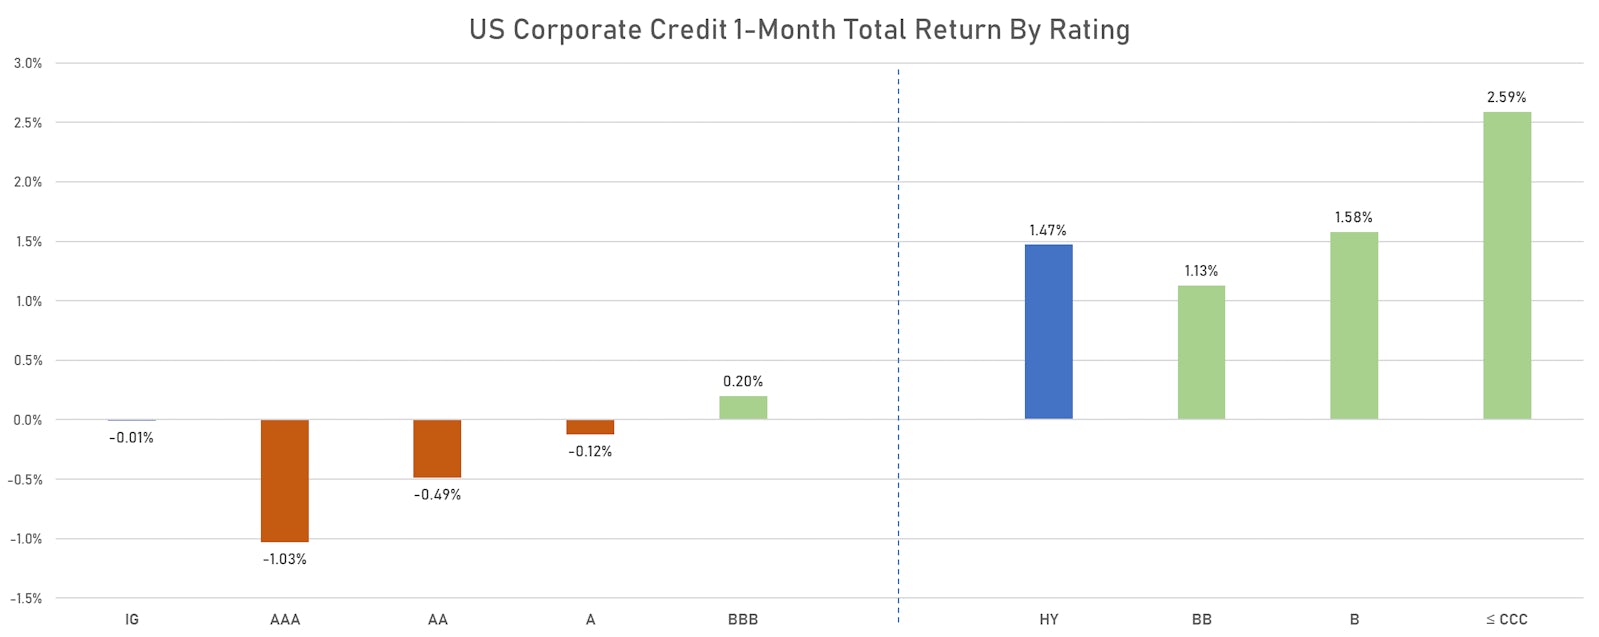 1-Month Total Returns for ICE BofA US Corporate indices | Sources: phipost.com, Refinitiv data